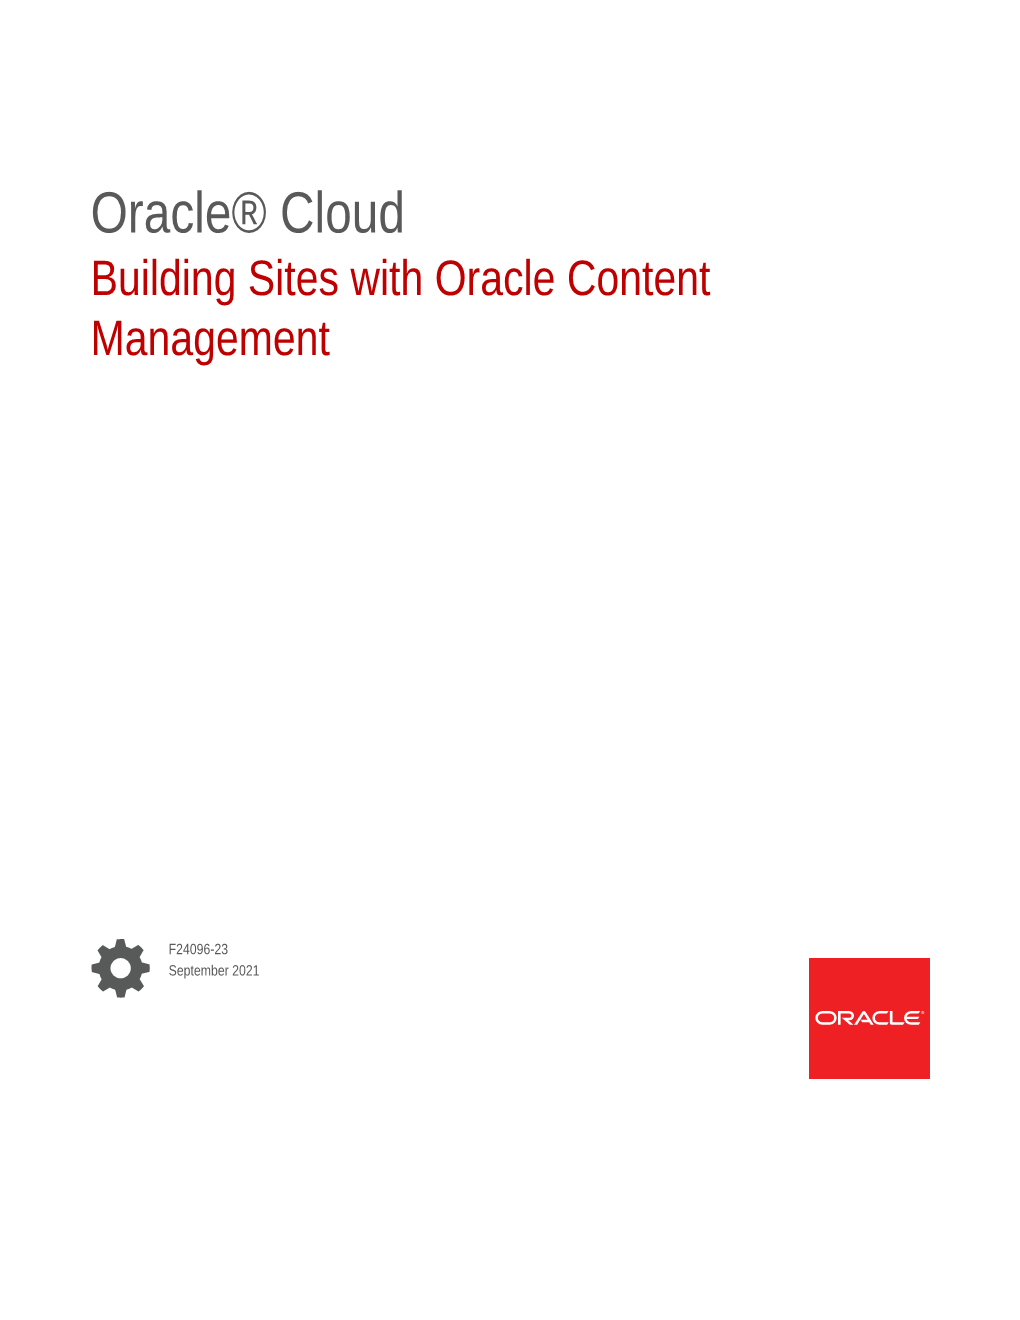 Building Sites with Oracle Content Management